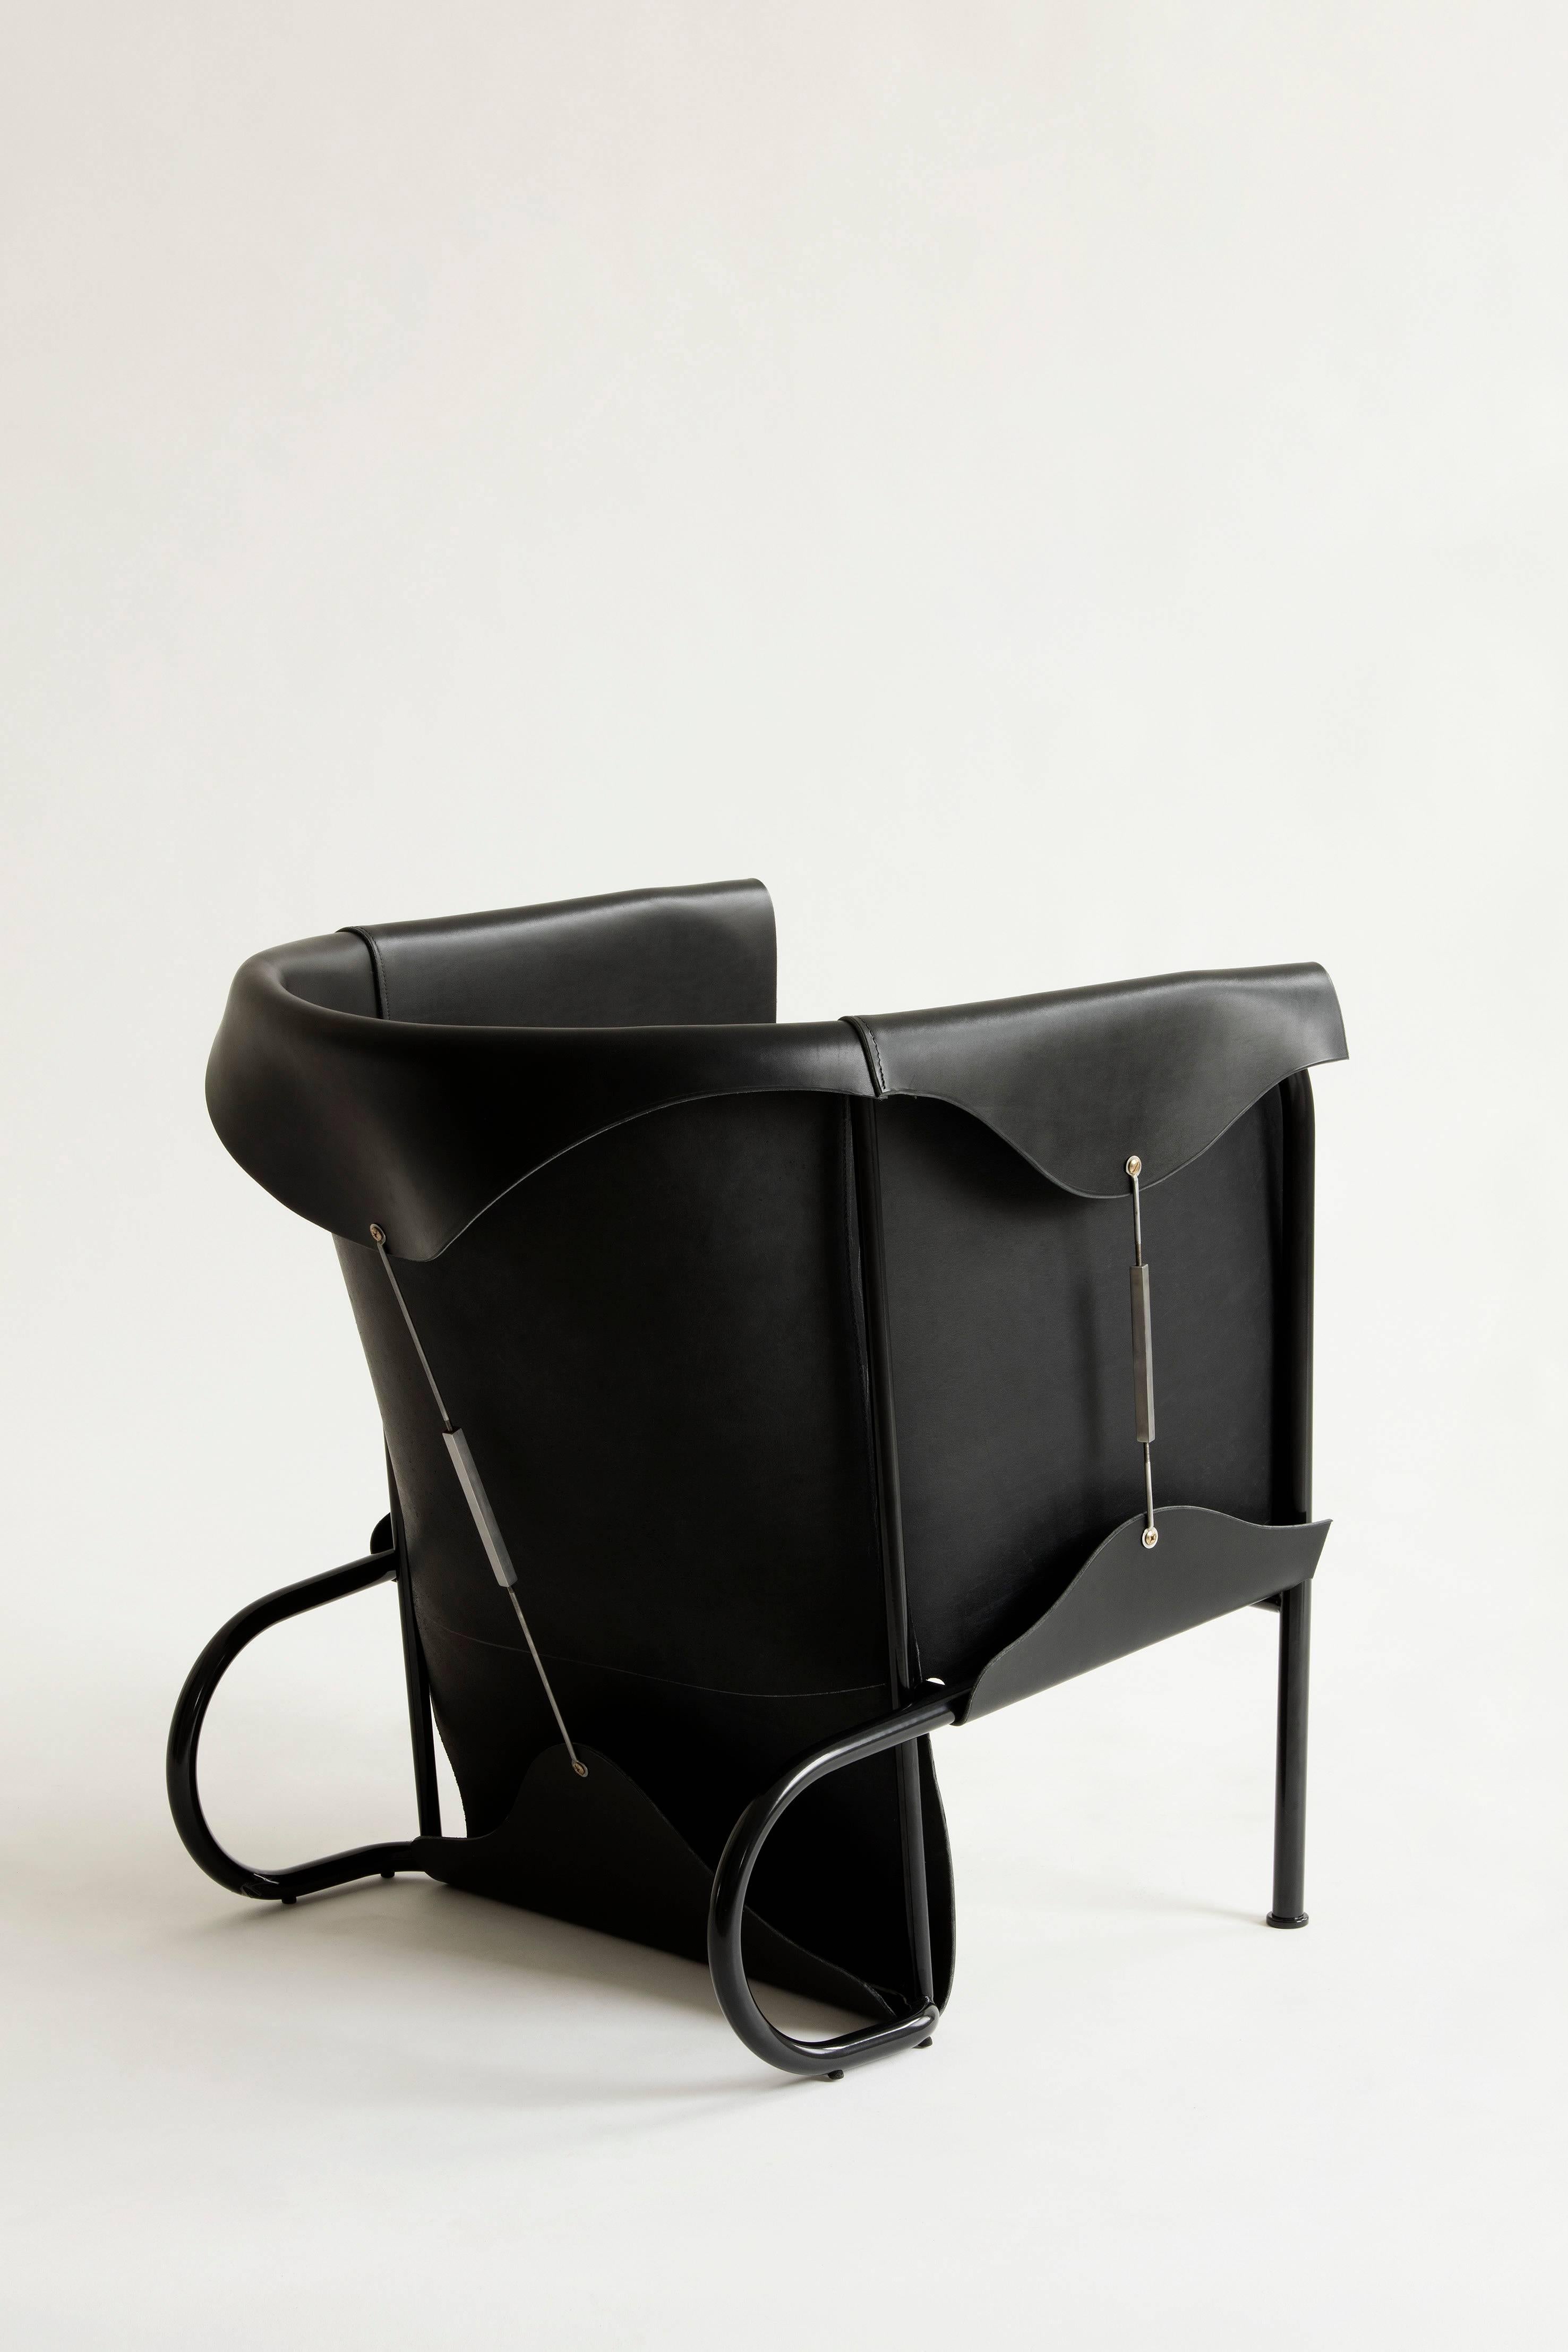 Swedish Club Chair, Inspired by English Saddlery and High Fashion in Leather For Sale